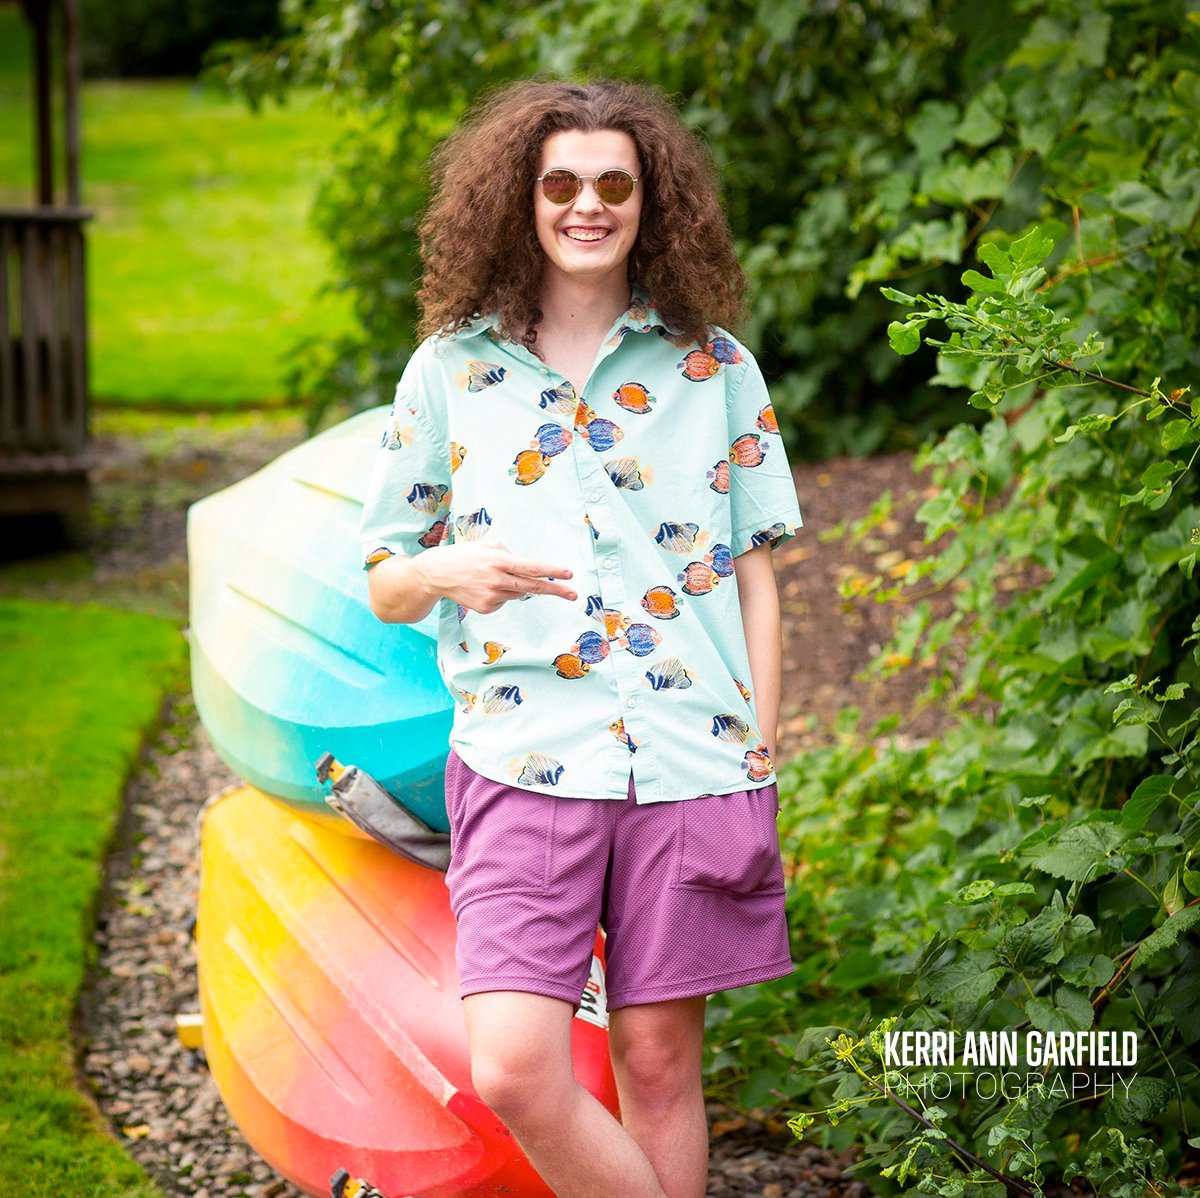 Remember when I said Harry was such a colorful guy? Check these pics out! I love his vibrant colors and personality!! It makes me want to go kayaking!! Such a fun Senior Photo Shoot!

@pie.fox6 @alliefoxb 

#kerrianngarfield #2023seniors #seniorpictu